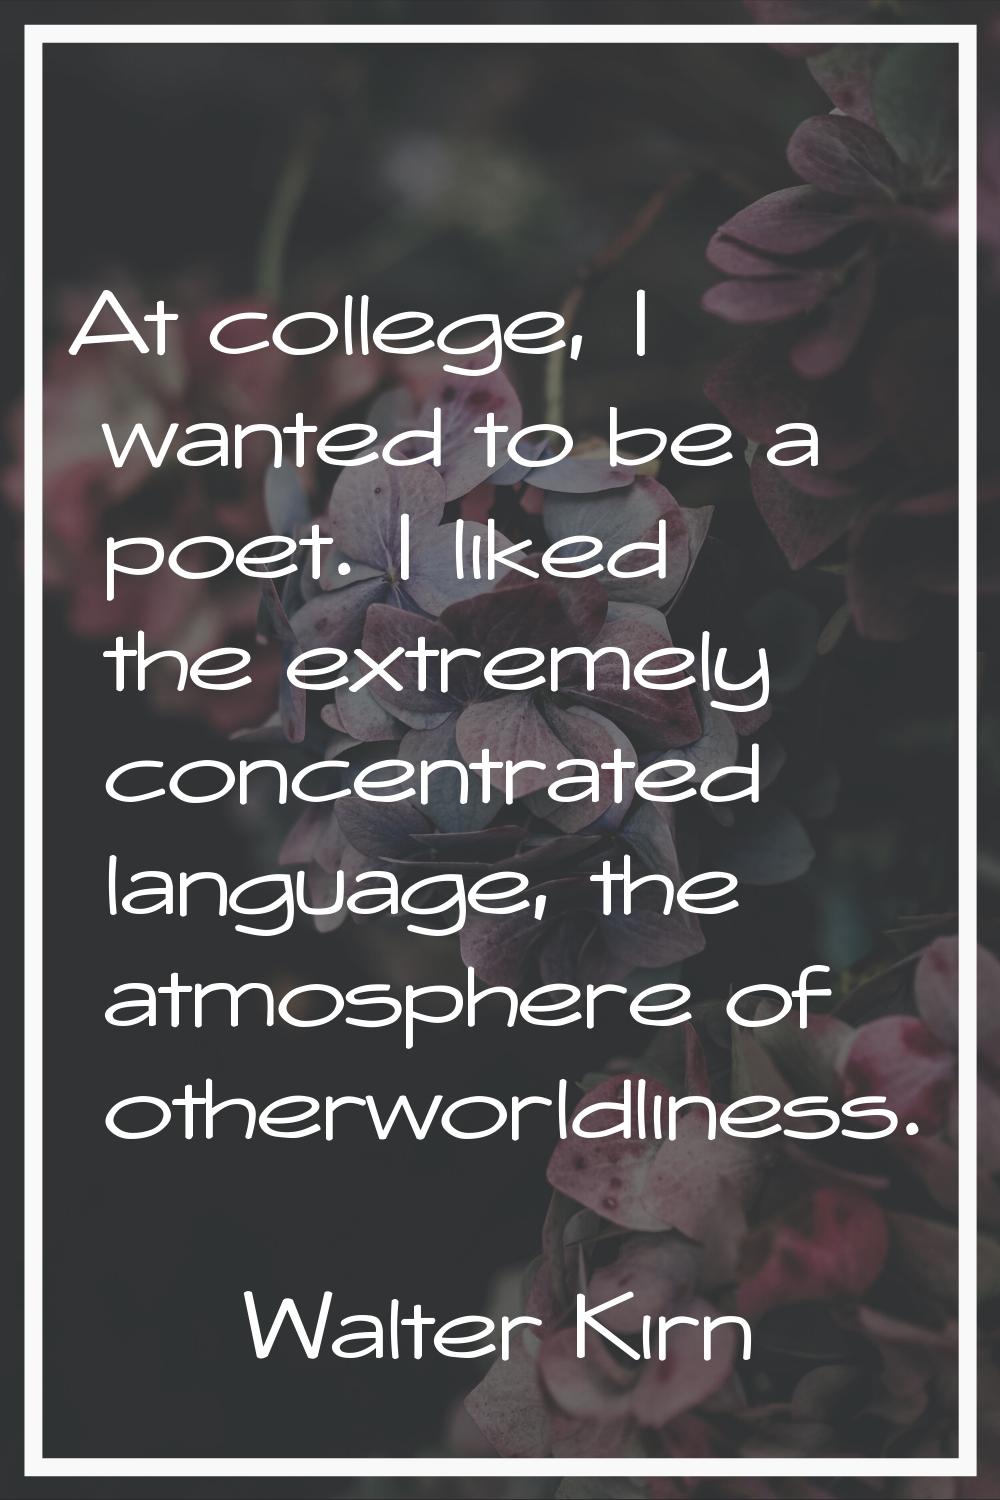 At college, I wanted to be a poet. I liked the extremely concentrated language, the atmosphere of o